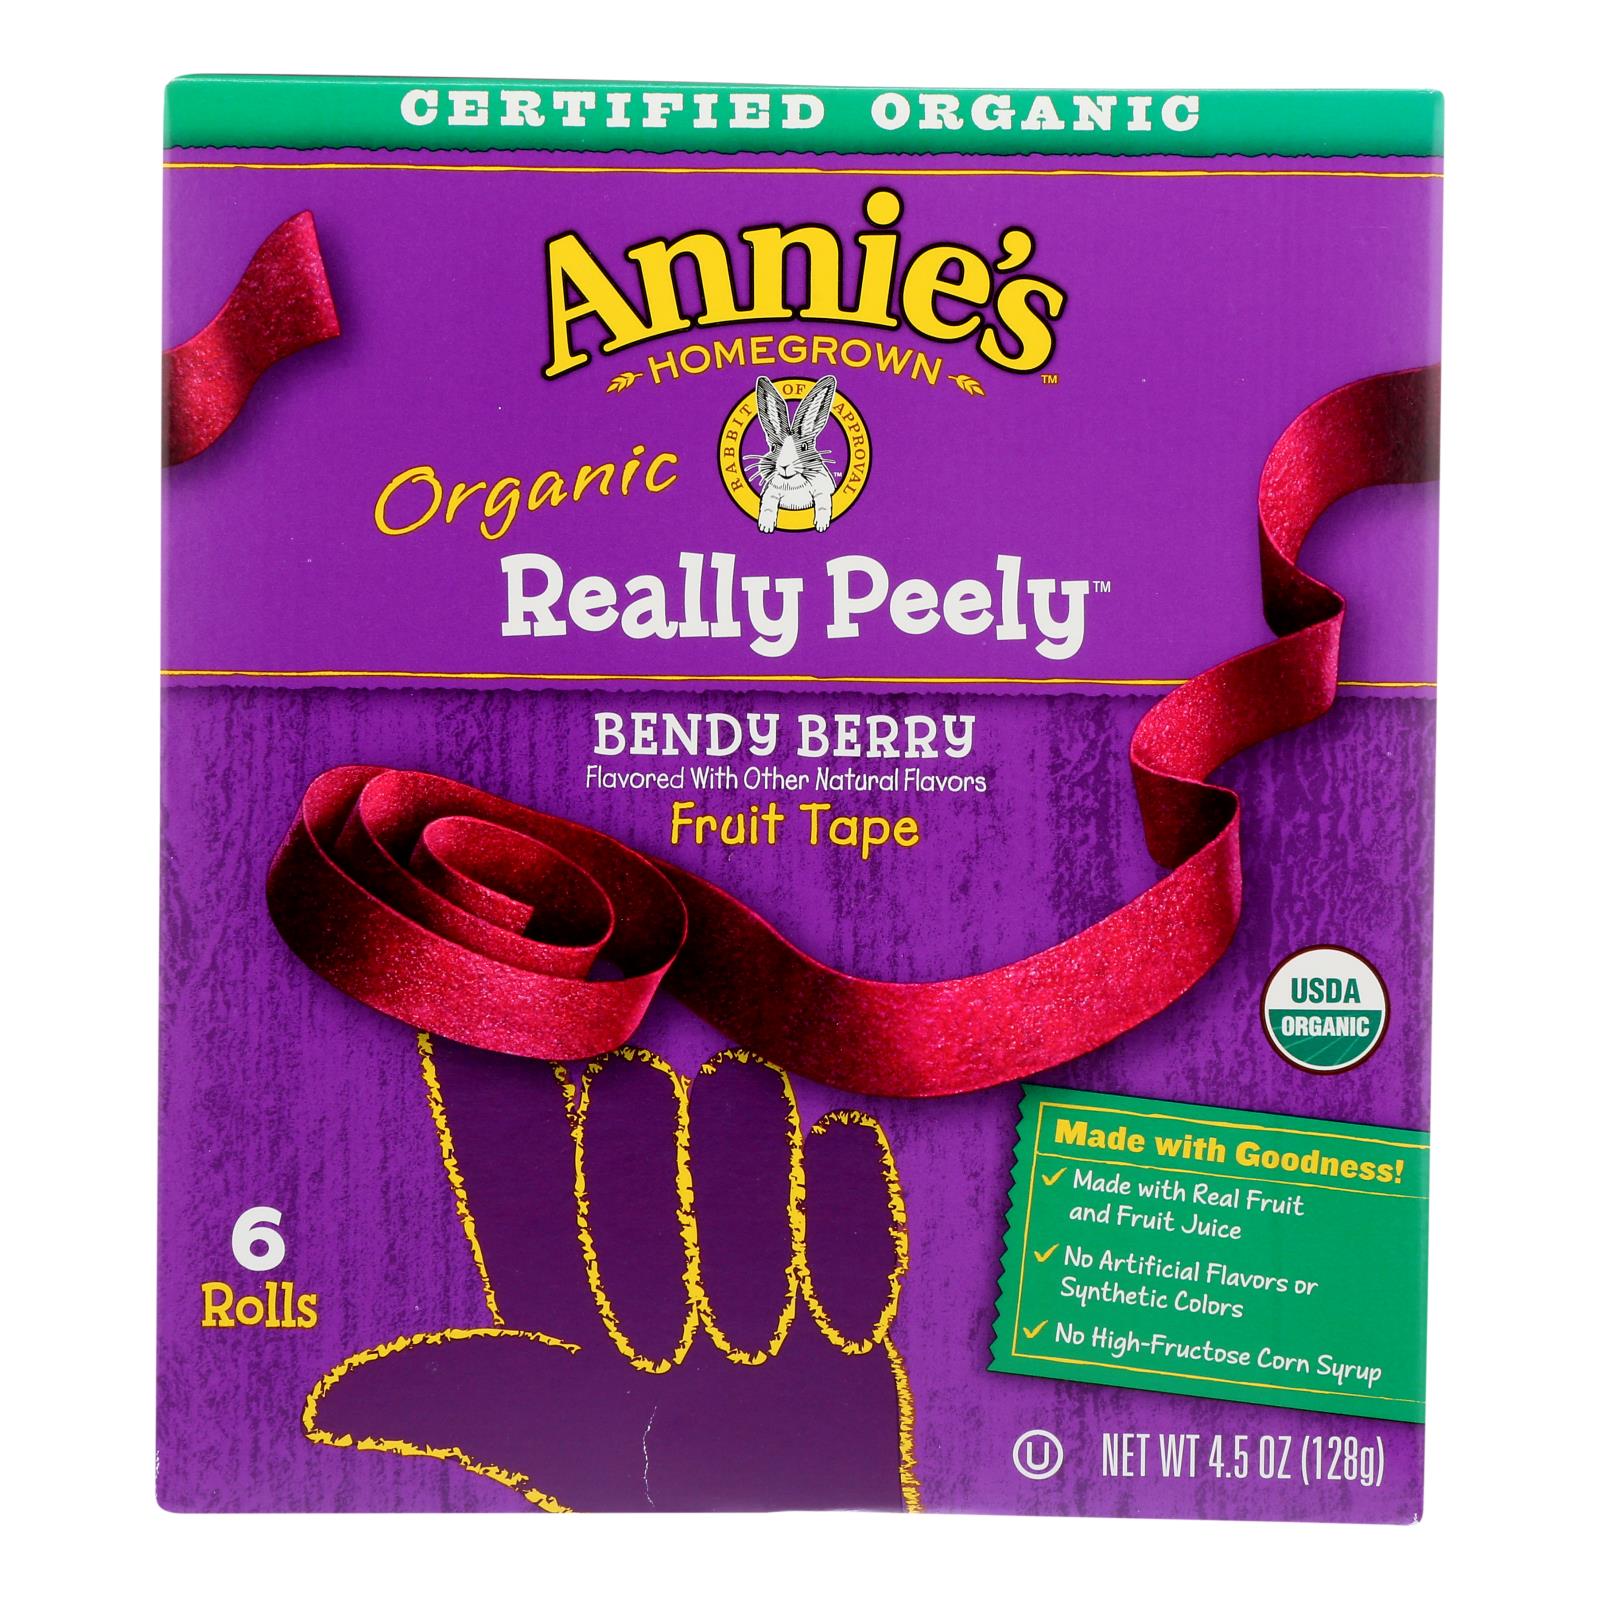 Annie'S Homegrown, Annie's Fruit Snacks Bendy Berry - Case of 6 - 4.5 oz. (Pack of 8)